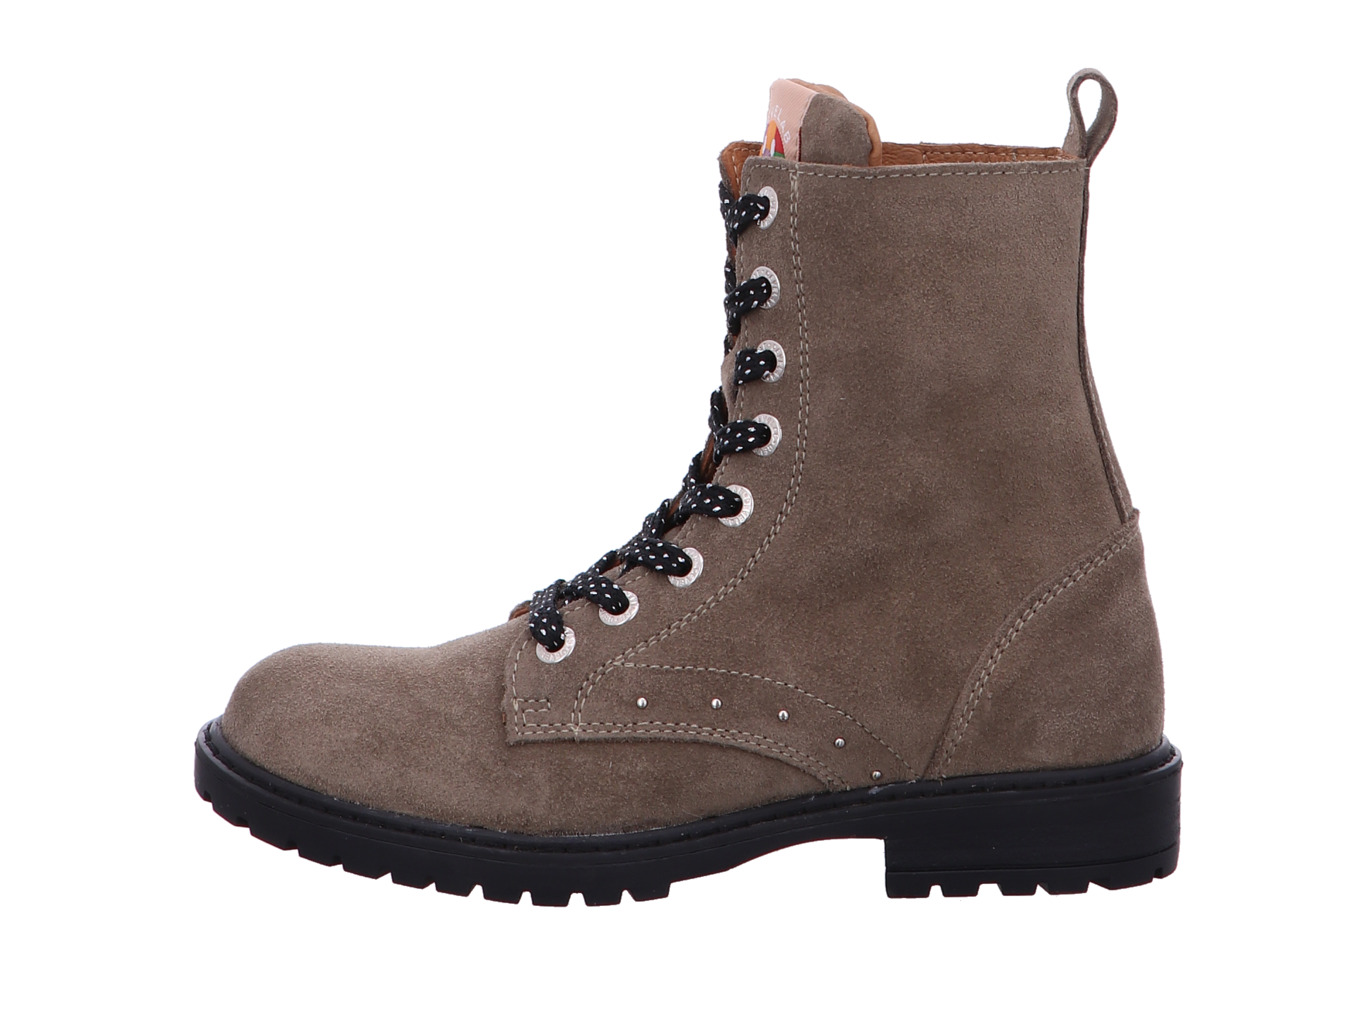 develab_girls_mid_boot_laces_42850_233_3196